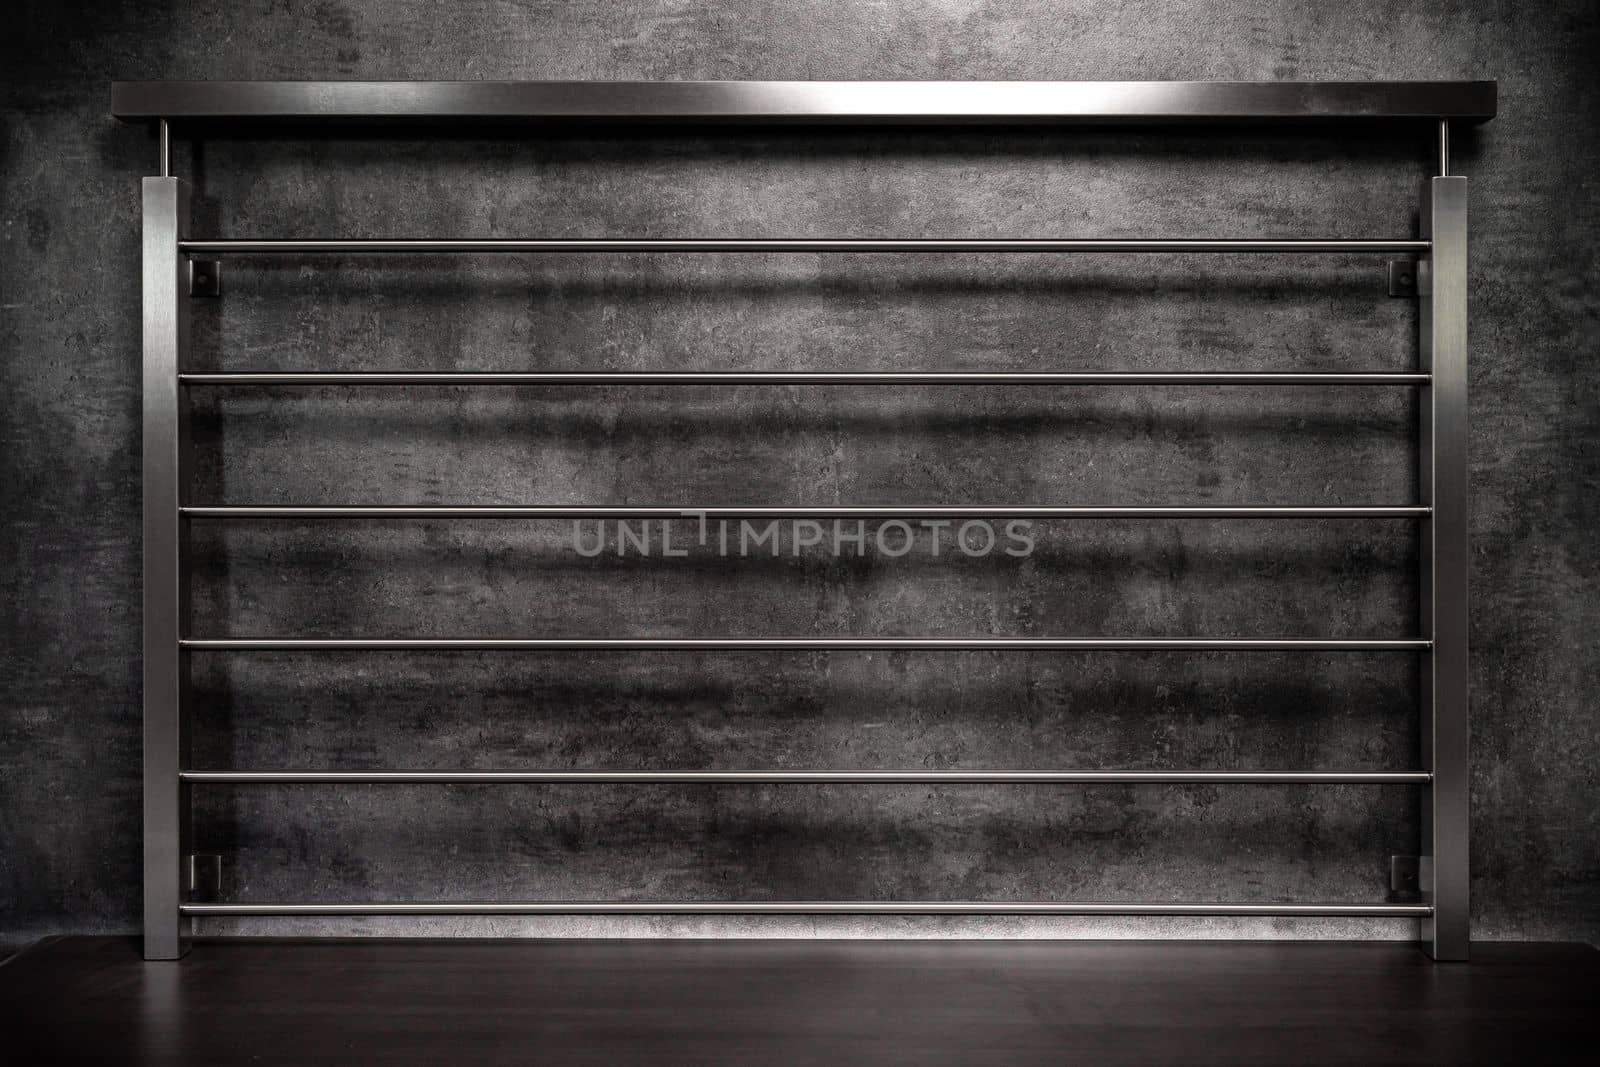 stainless steel railings on a dark background. High quality photo